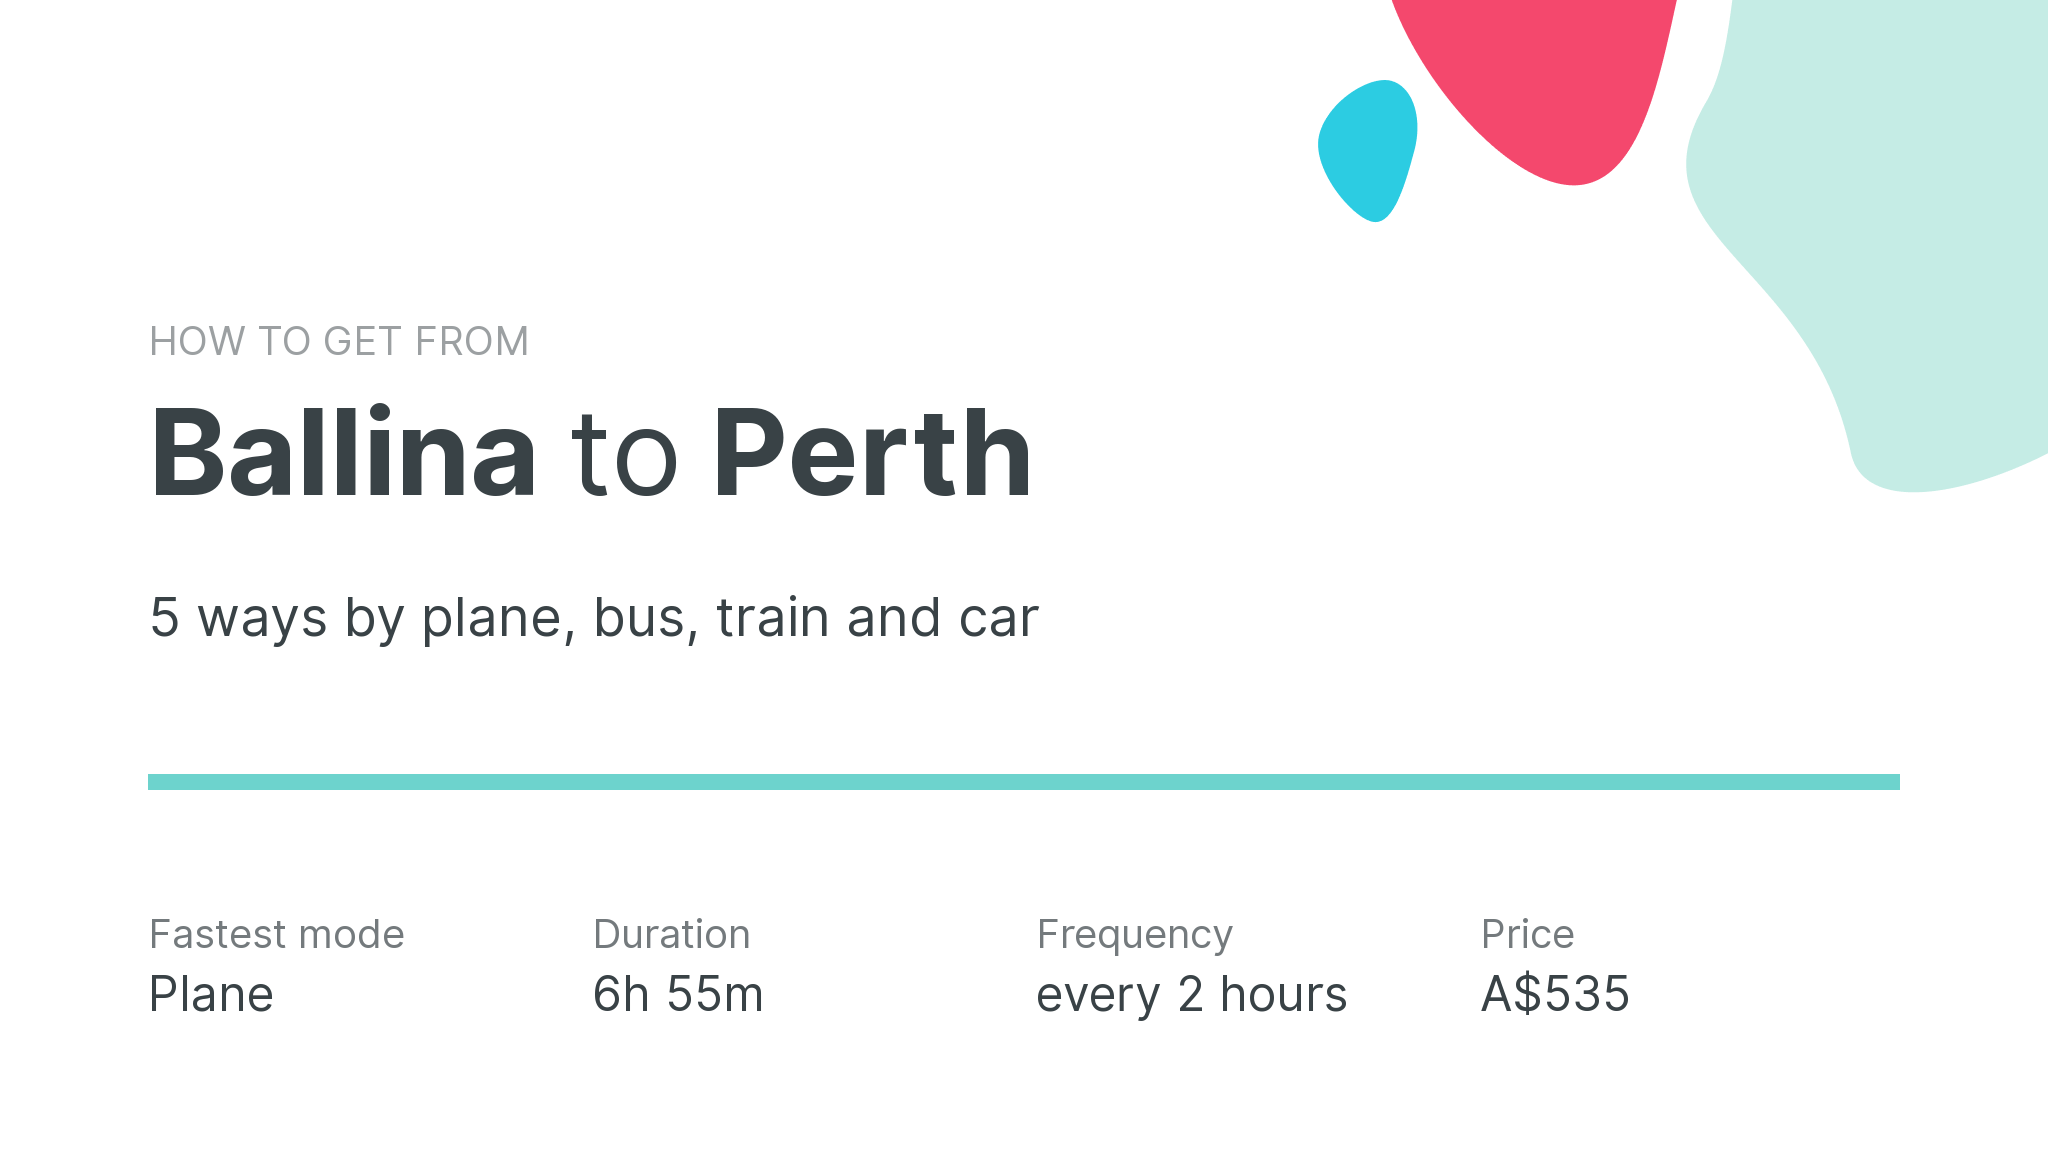 How do I get from Ballina to Perth